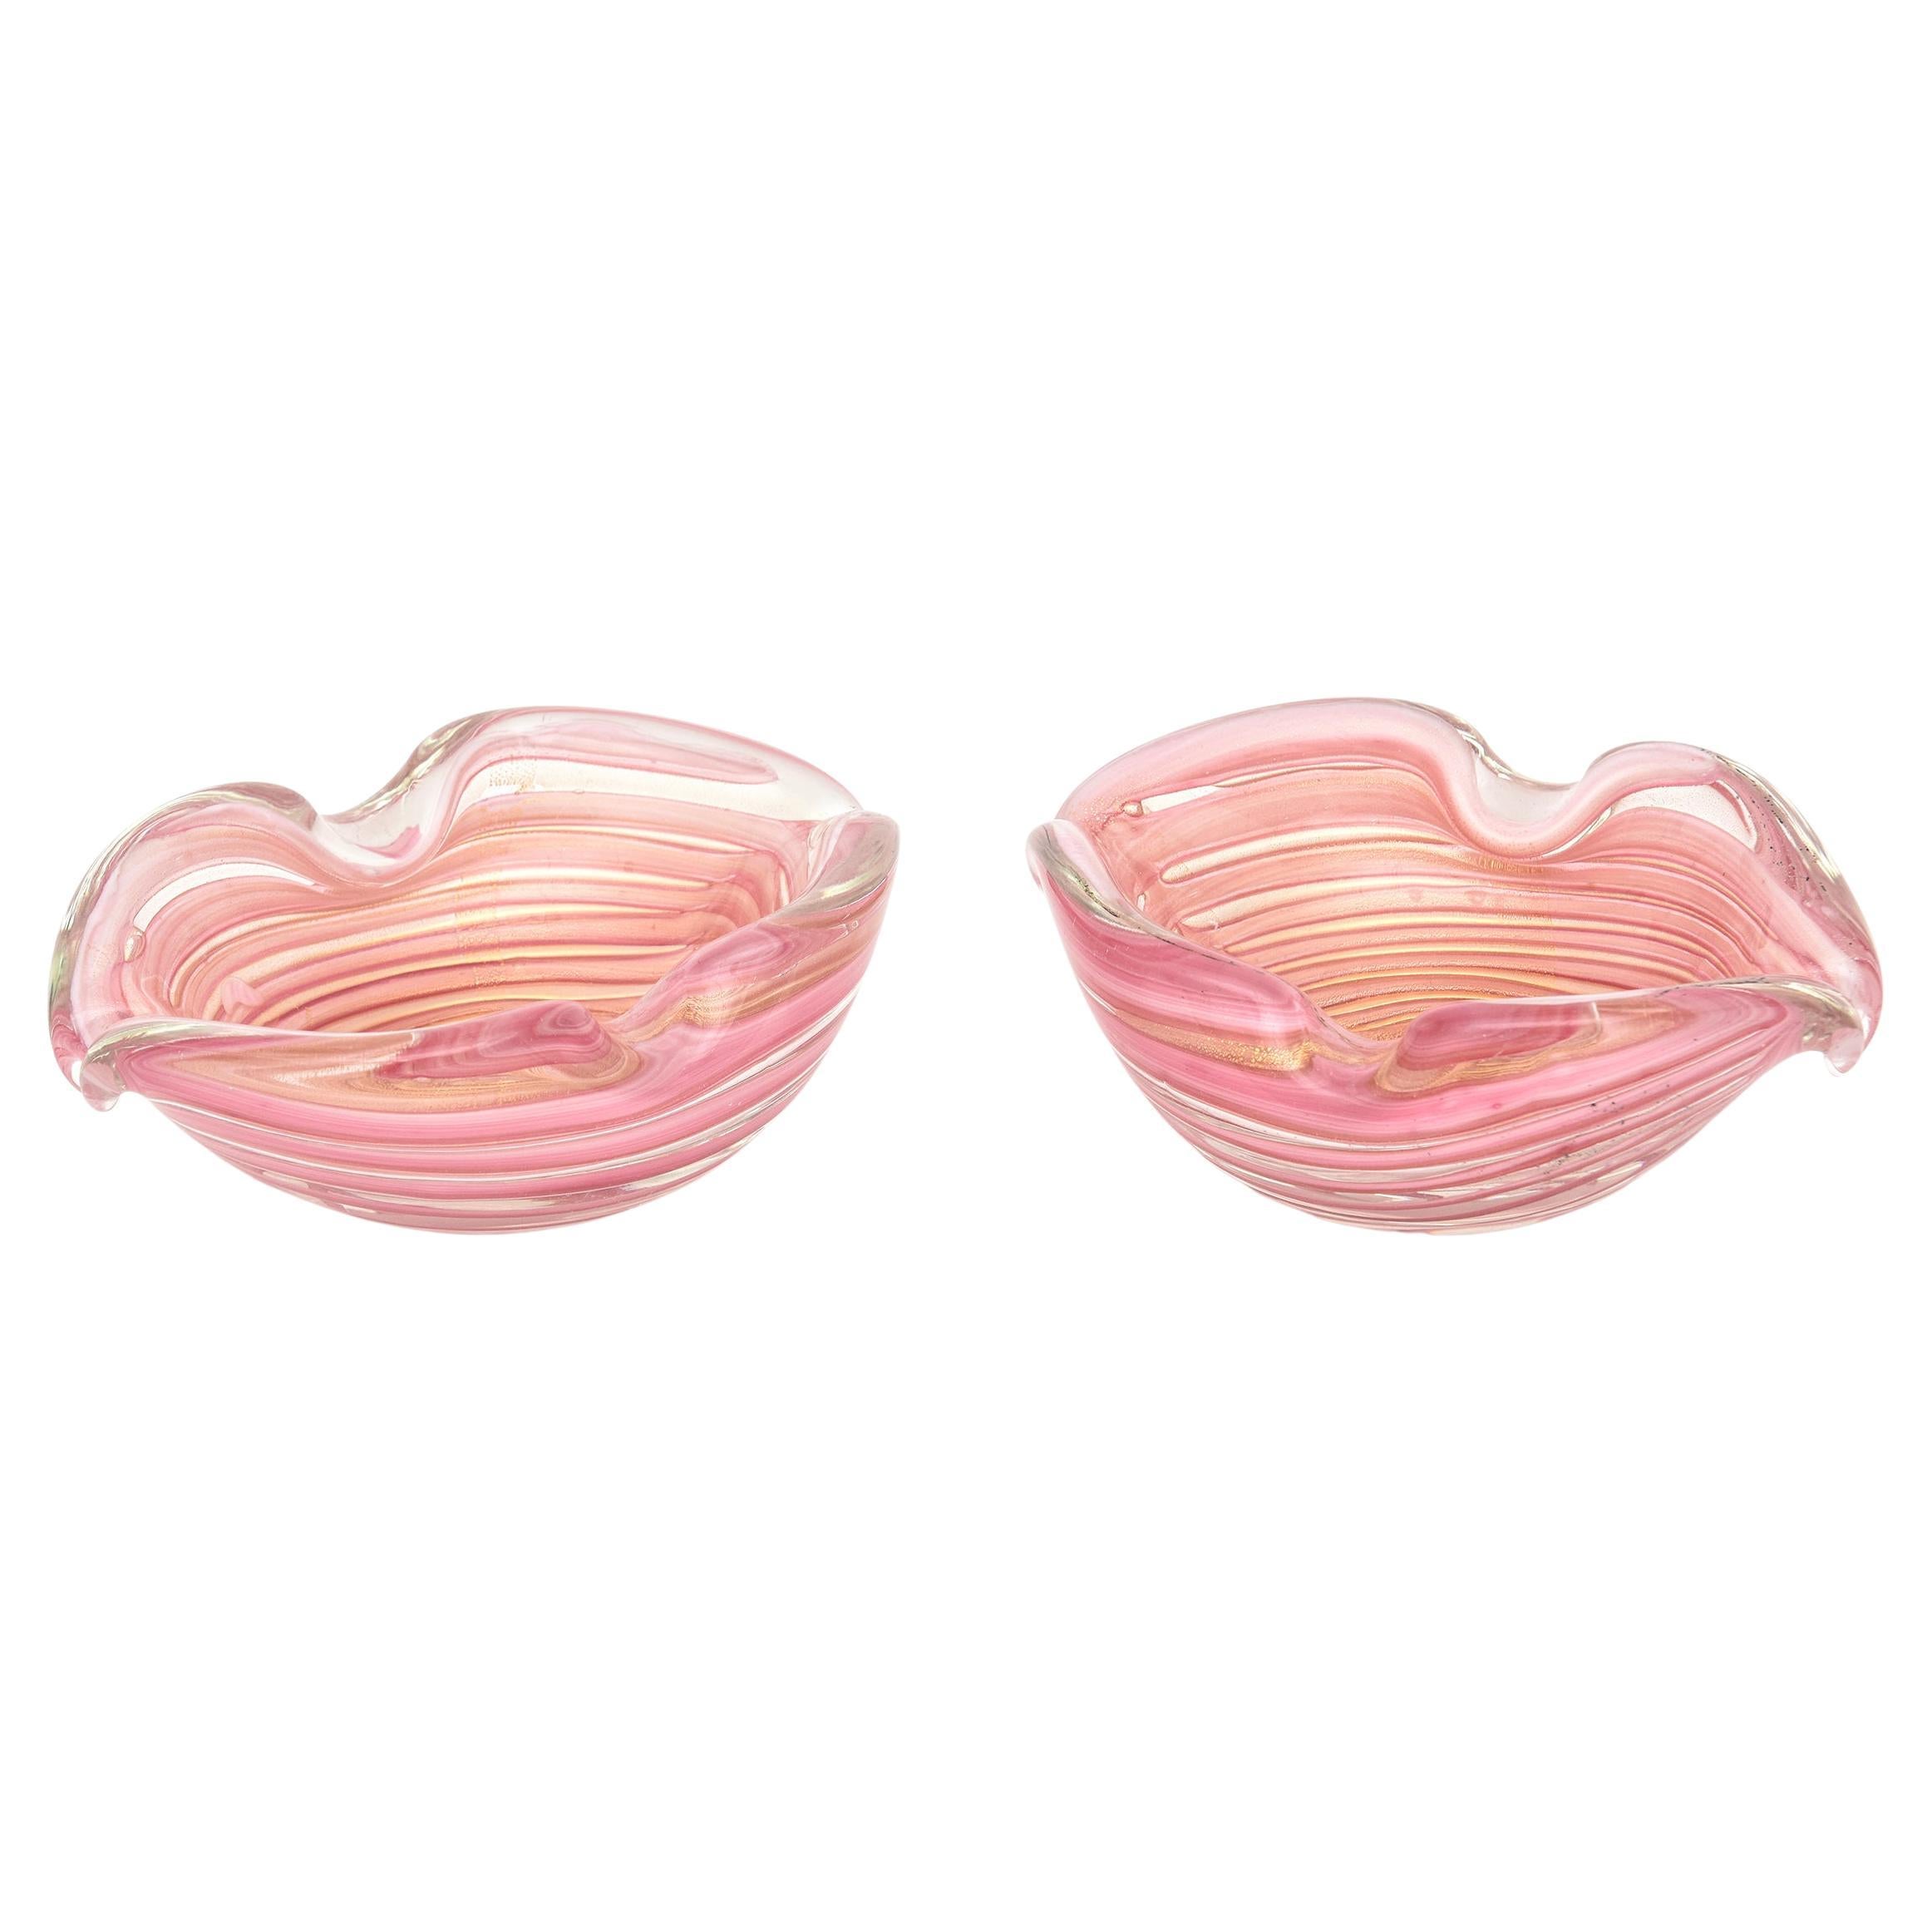 Vintage Murano Barovier e Toso Pink Striped with Gold Flecks Glass Bowls Pair Of